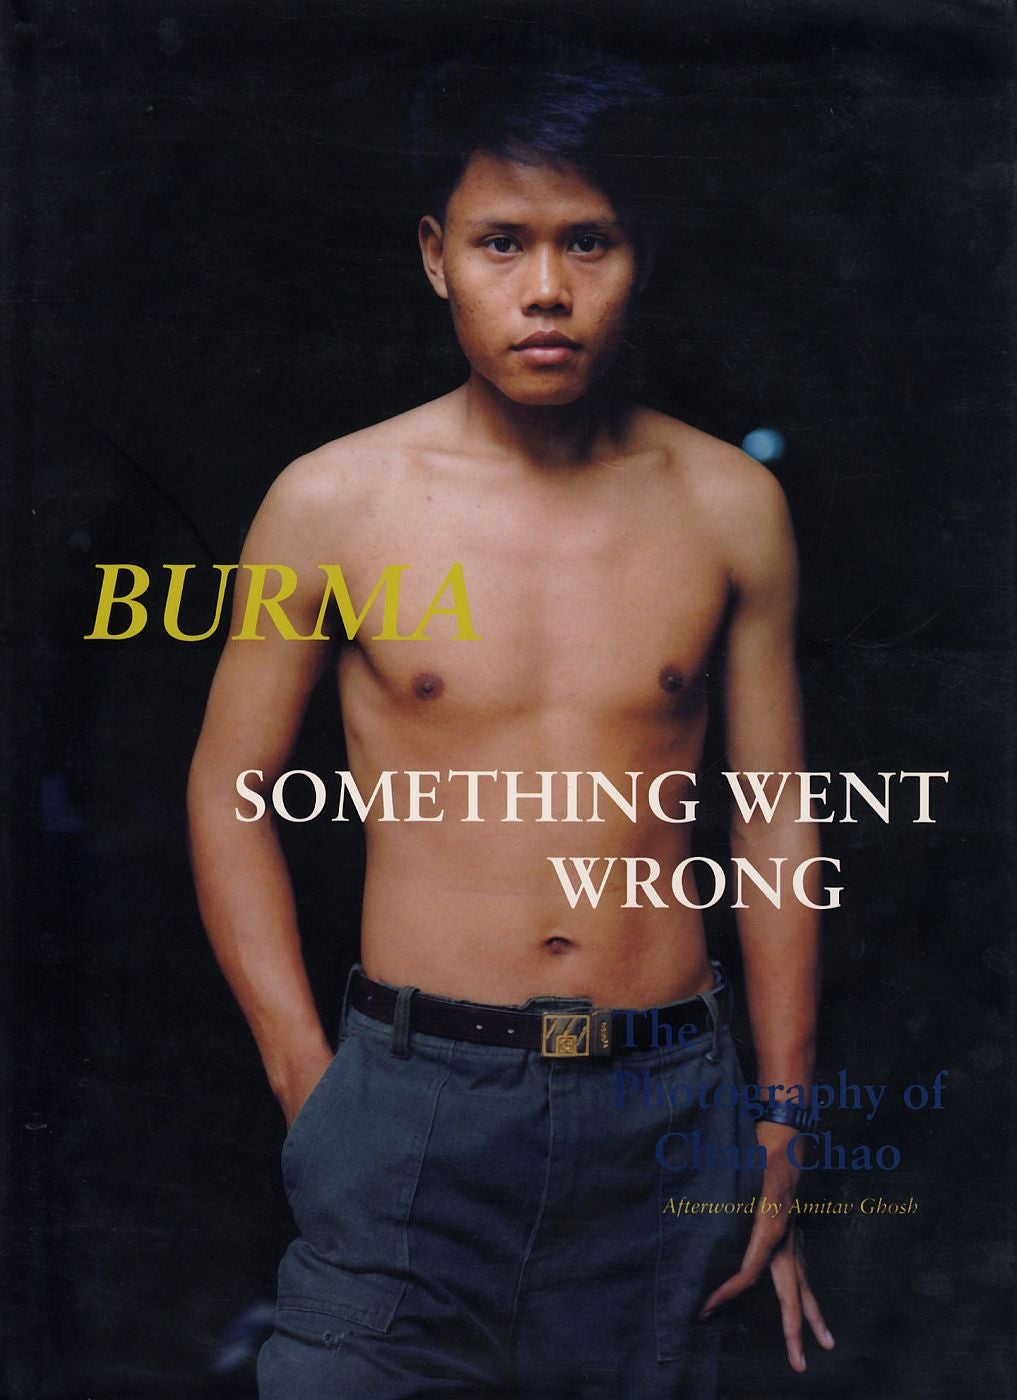 Chan Chao: Burma: Something Went Wrong, Special Limited Edition (with "Tin Taw Liang, 1997" Type-C Print Variant)